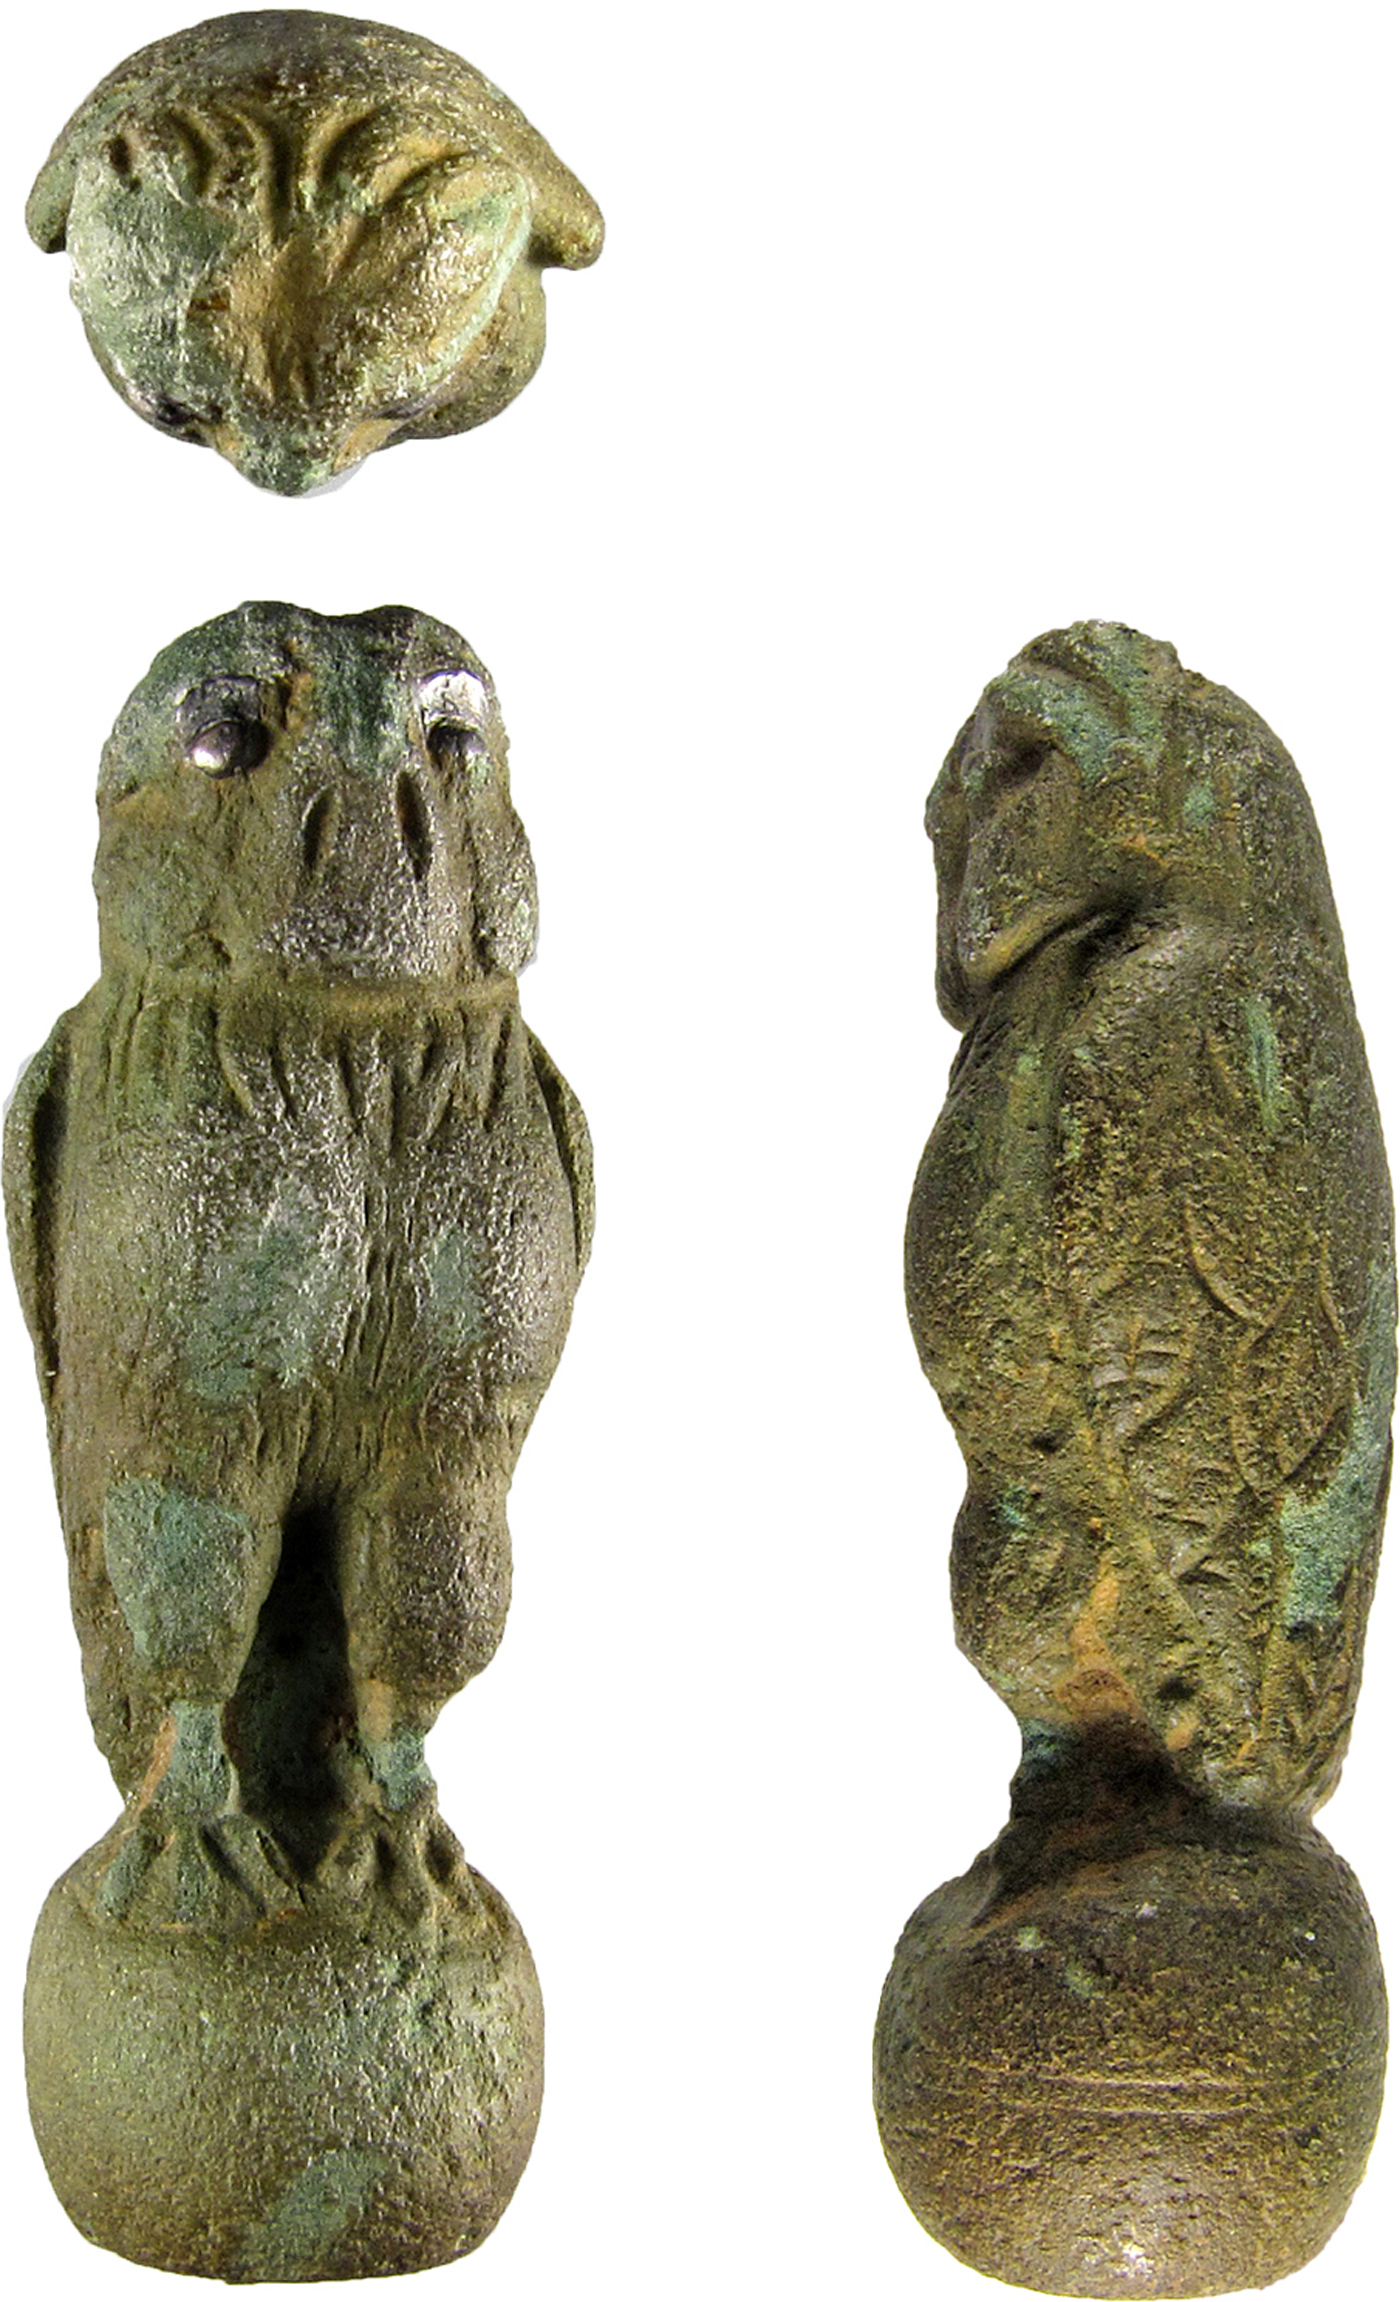 Solid Brass Amber Figurine of the Goat with a beard IronWork